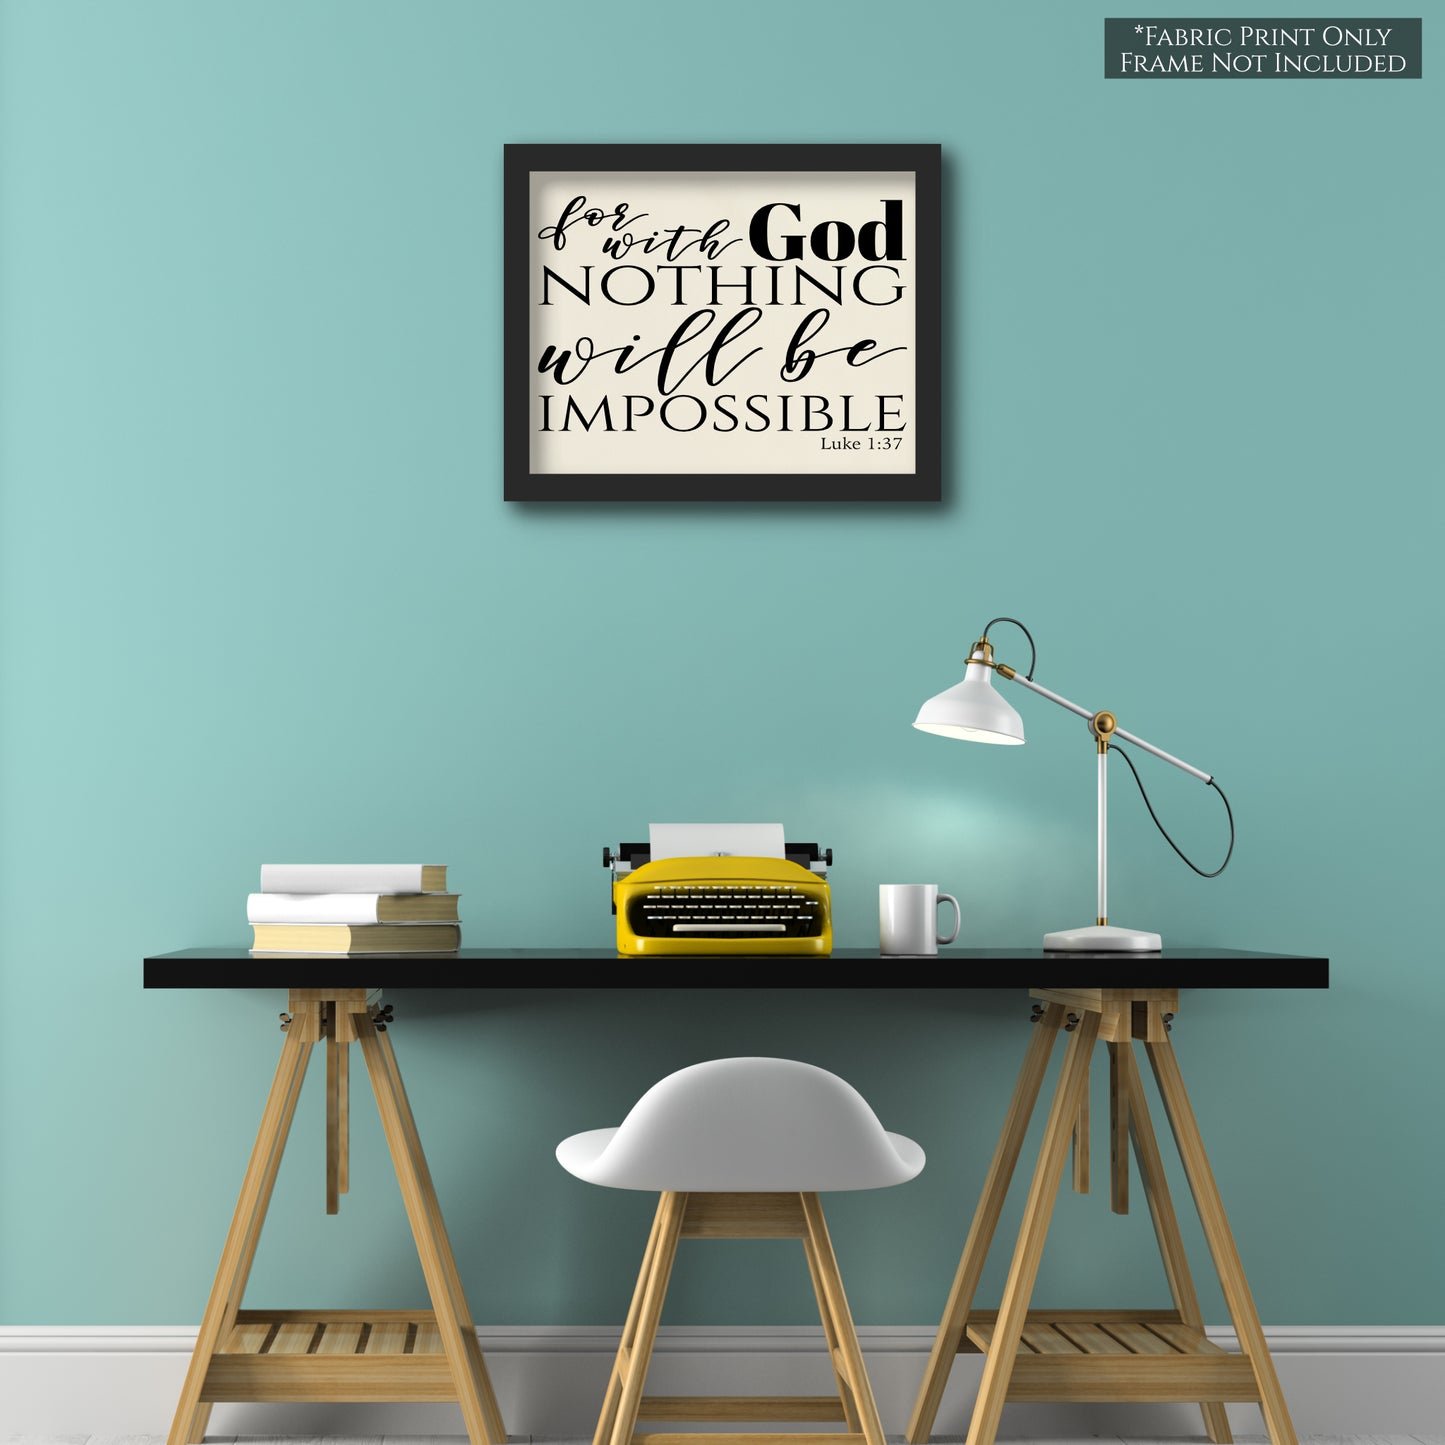 For with God Nothing will be impossible. Luke 1 37, Bible Verse Wall Art, Fabric Panel Print, Quilt Block - Wall Art